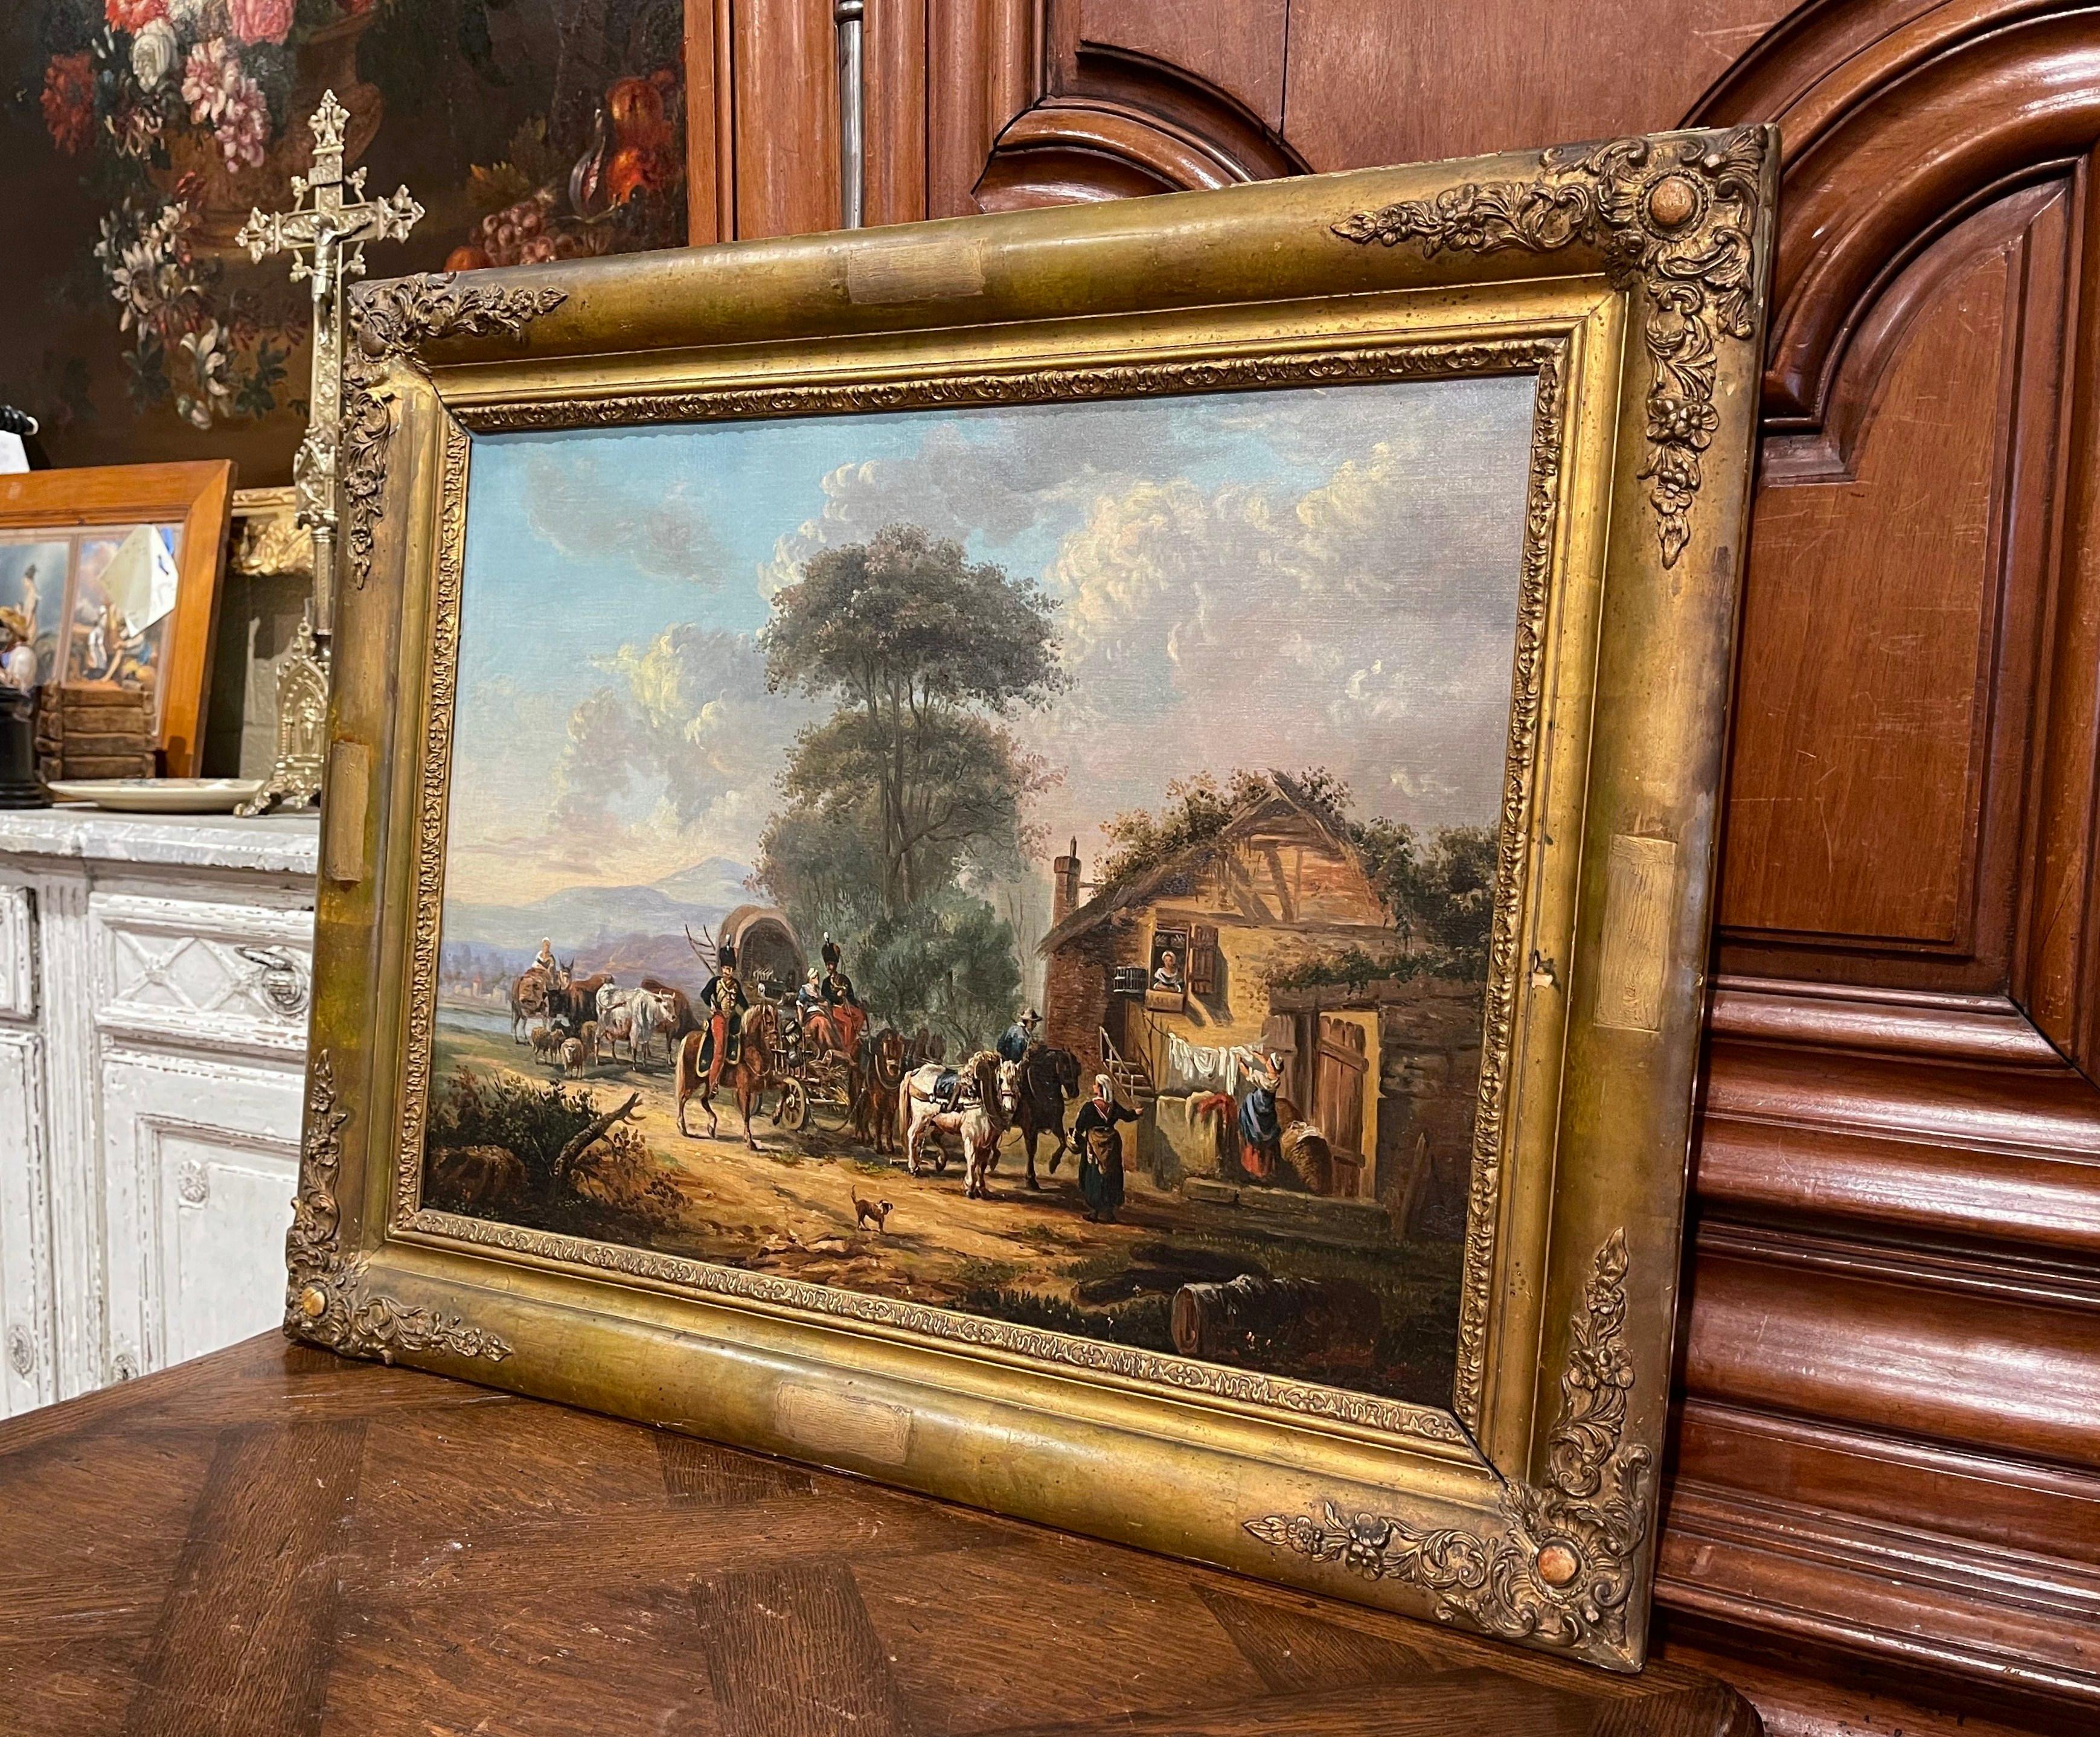 Set in the original carved gilt wood frame and painted in France circa 1860, the antique canvas depicts a pastoral scene with soldiers on horse-drawn carriage stopping in front of a farmhouse. The soldiers are wearing Napoleon III uniforms, and the